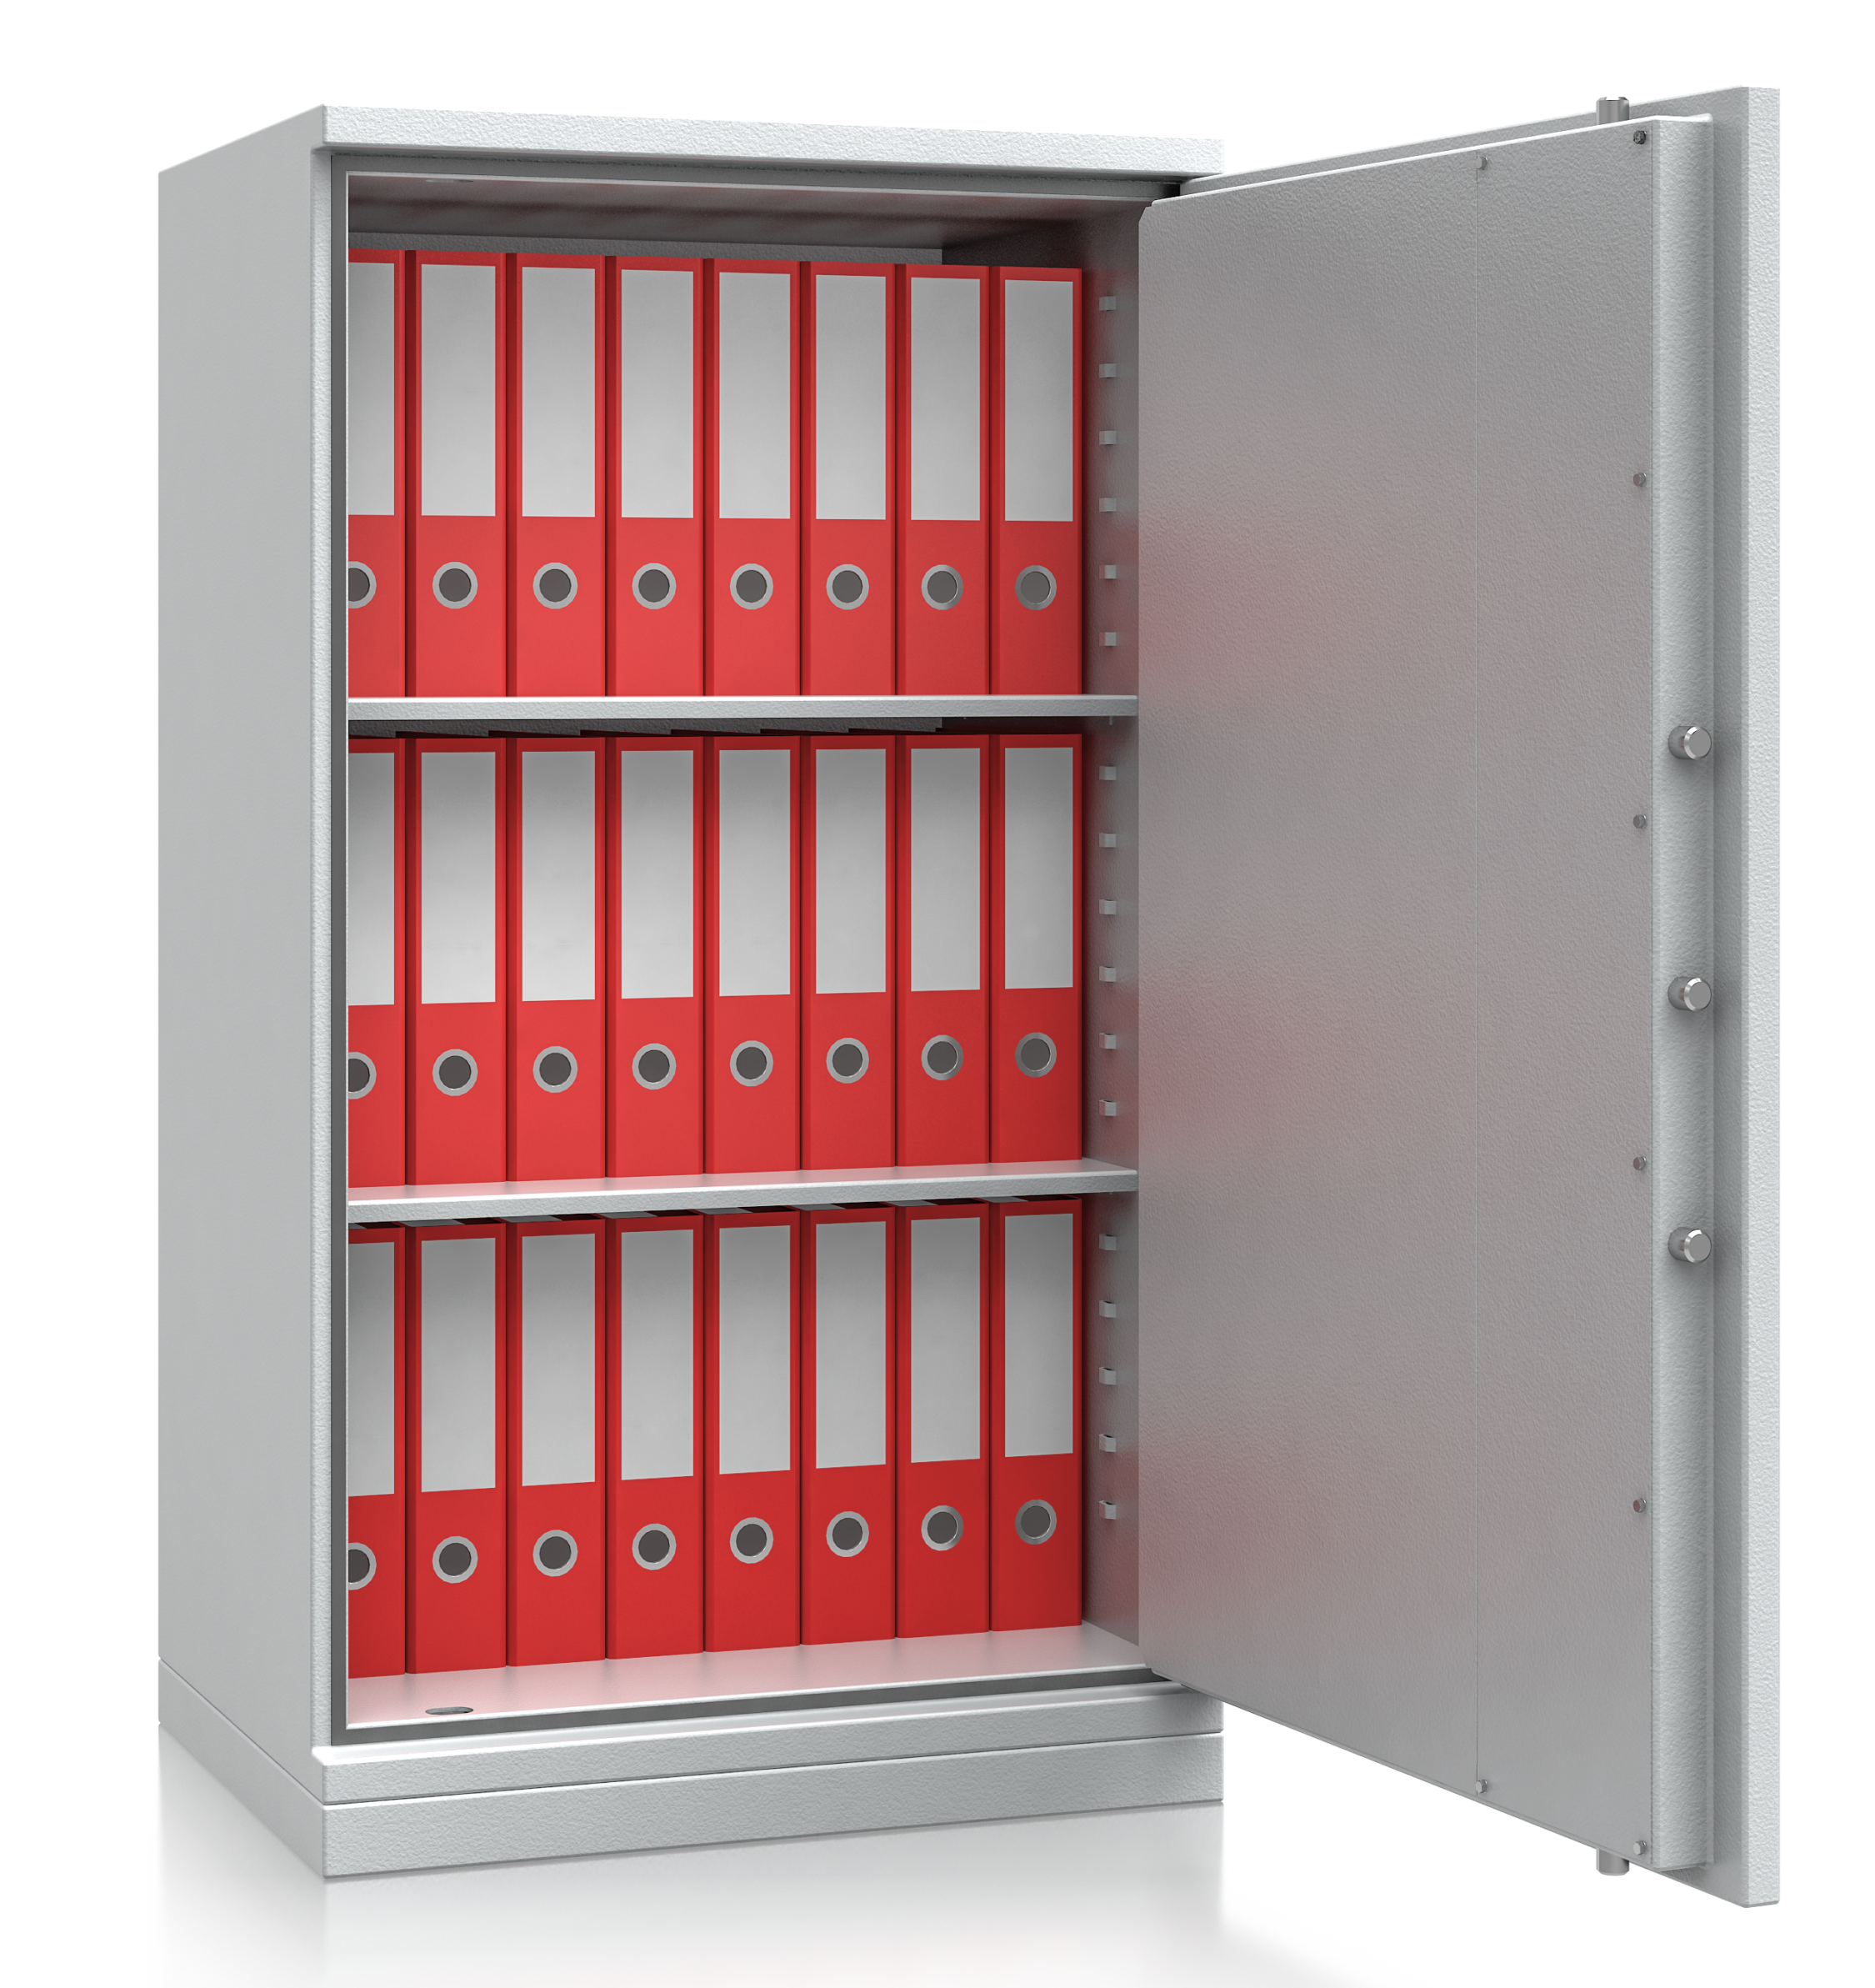 PS-120A fire resistance cabinet with folders